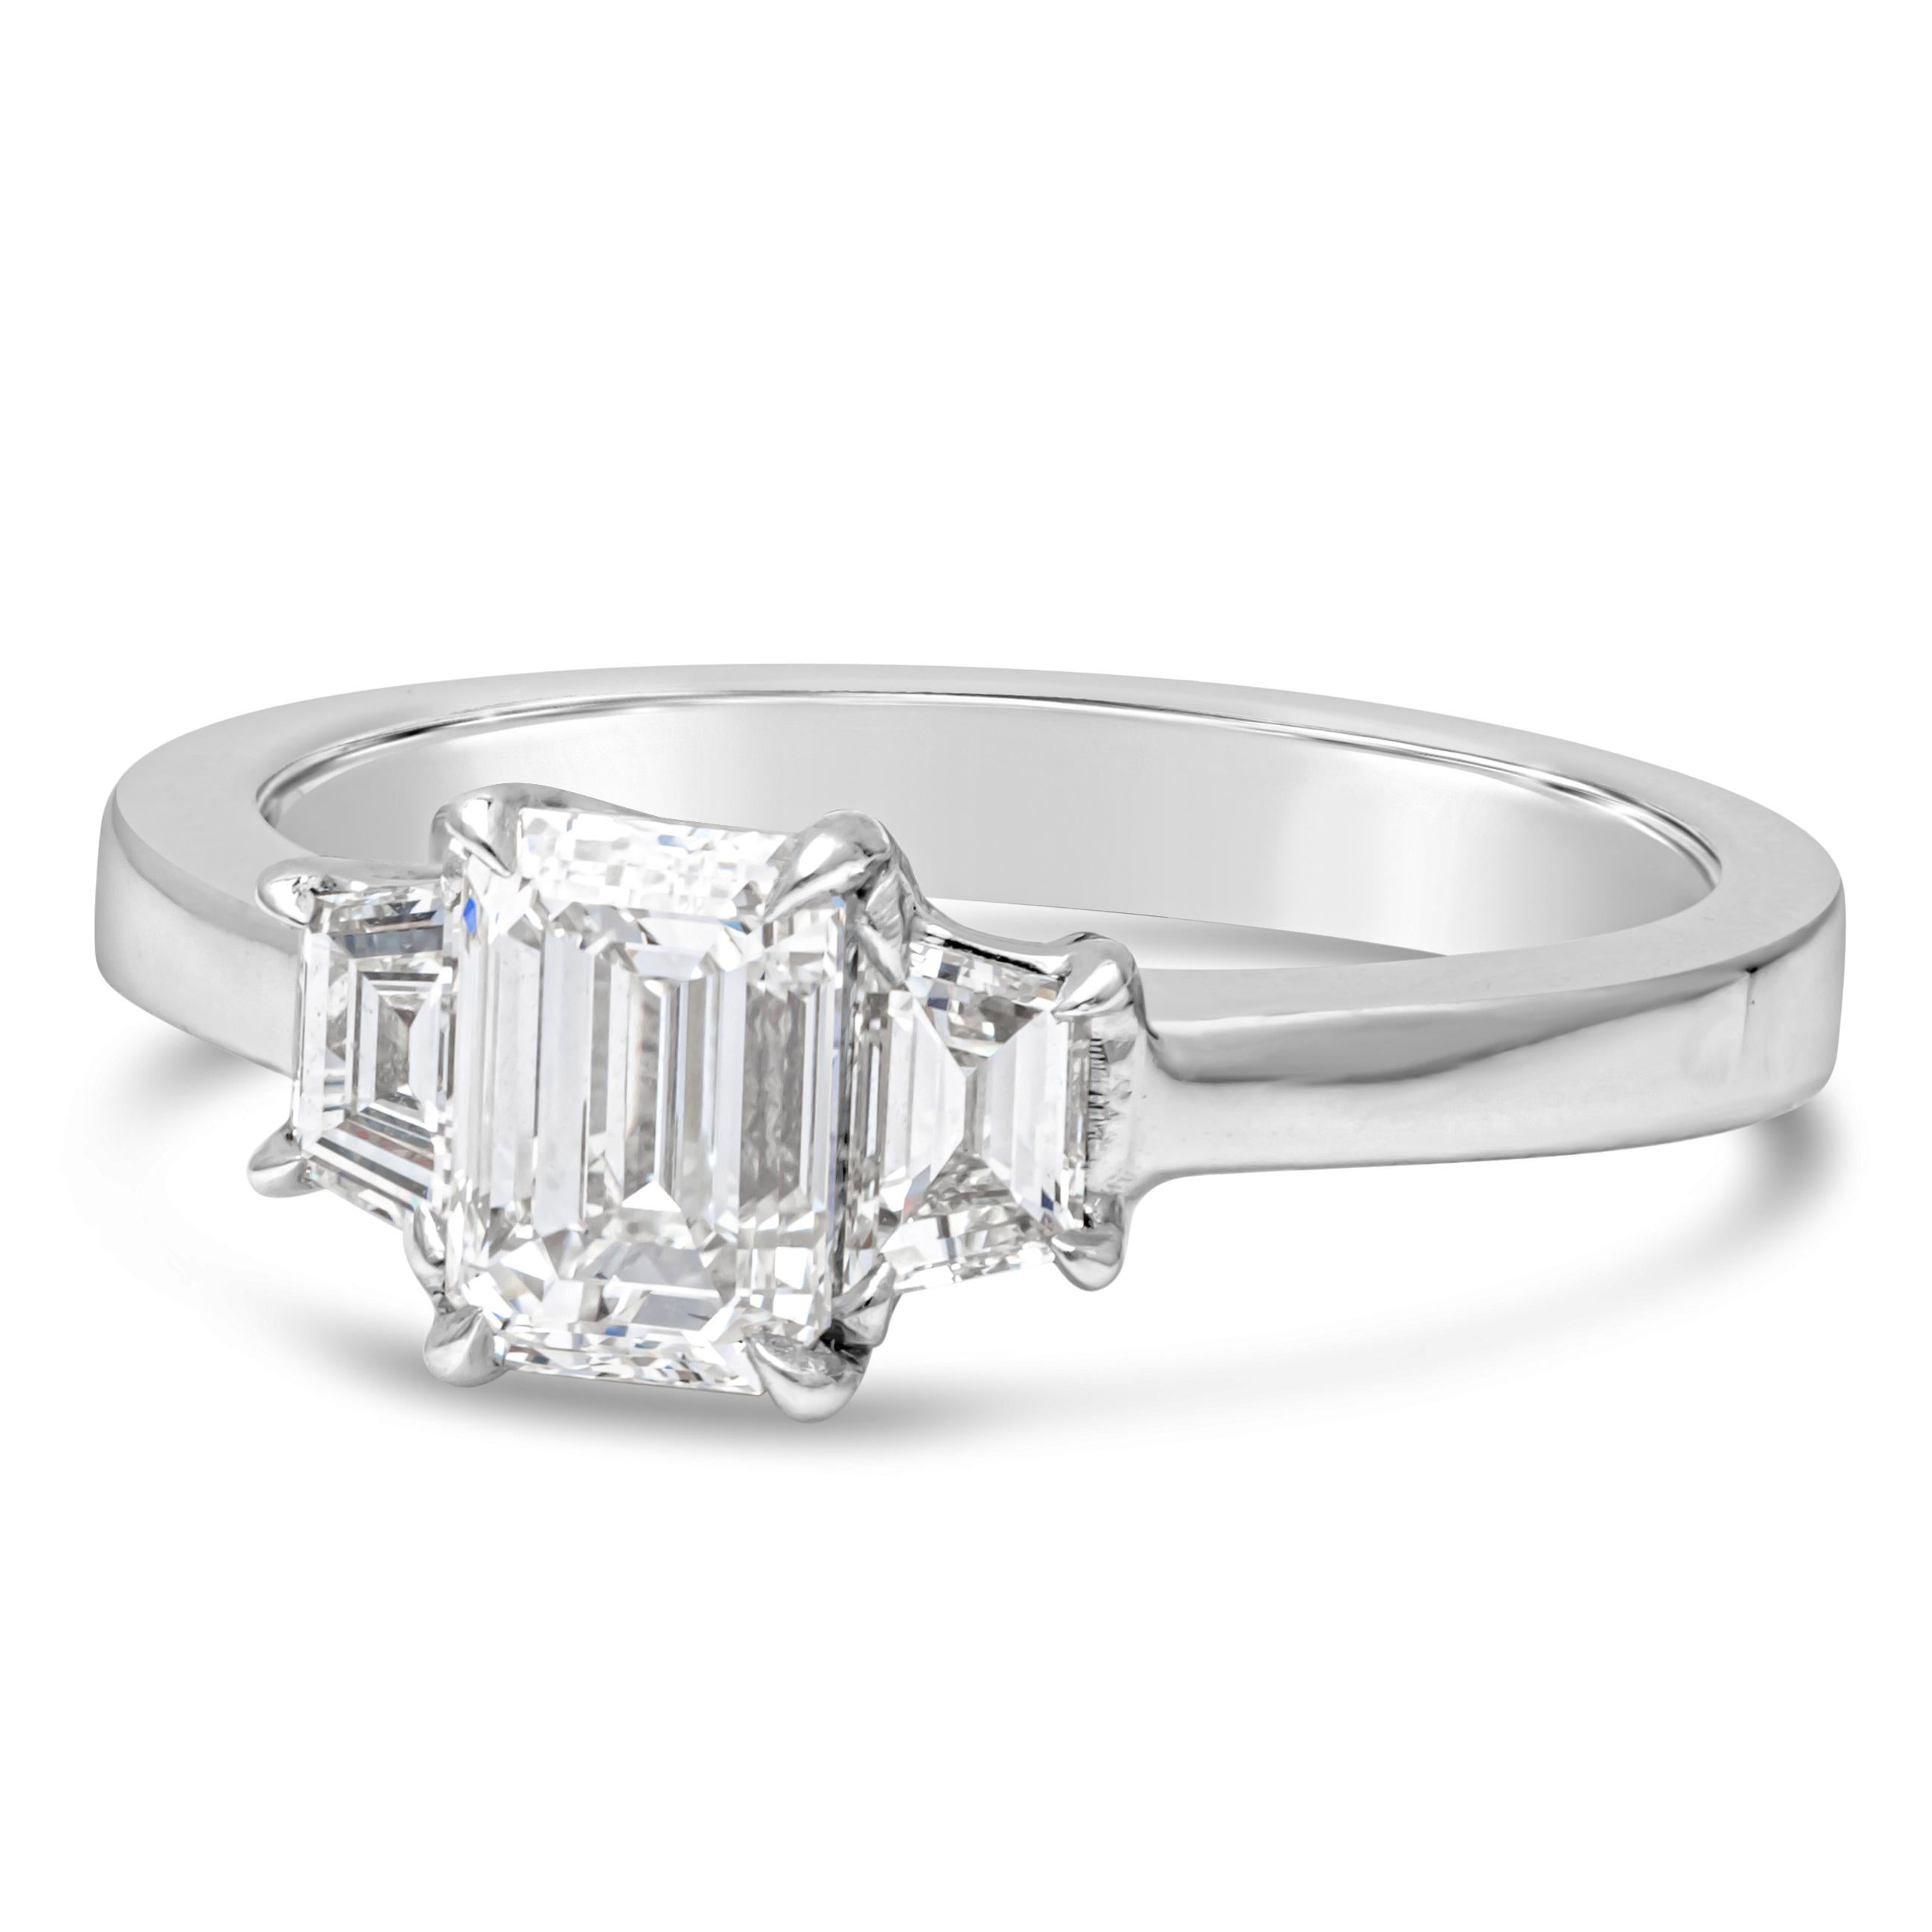 Elegantly made three stone engagement ring features a 0.93 carats emerald cut diamond set in platinum four prong setting. Flanked by trapezoid-cut diamonds on each side, weighing 0.33 carats total set in polished platinum mounting. Size 6.25 US,